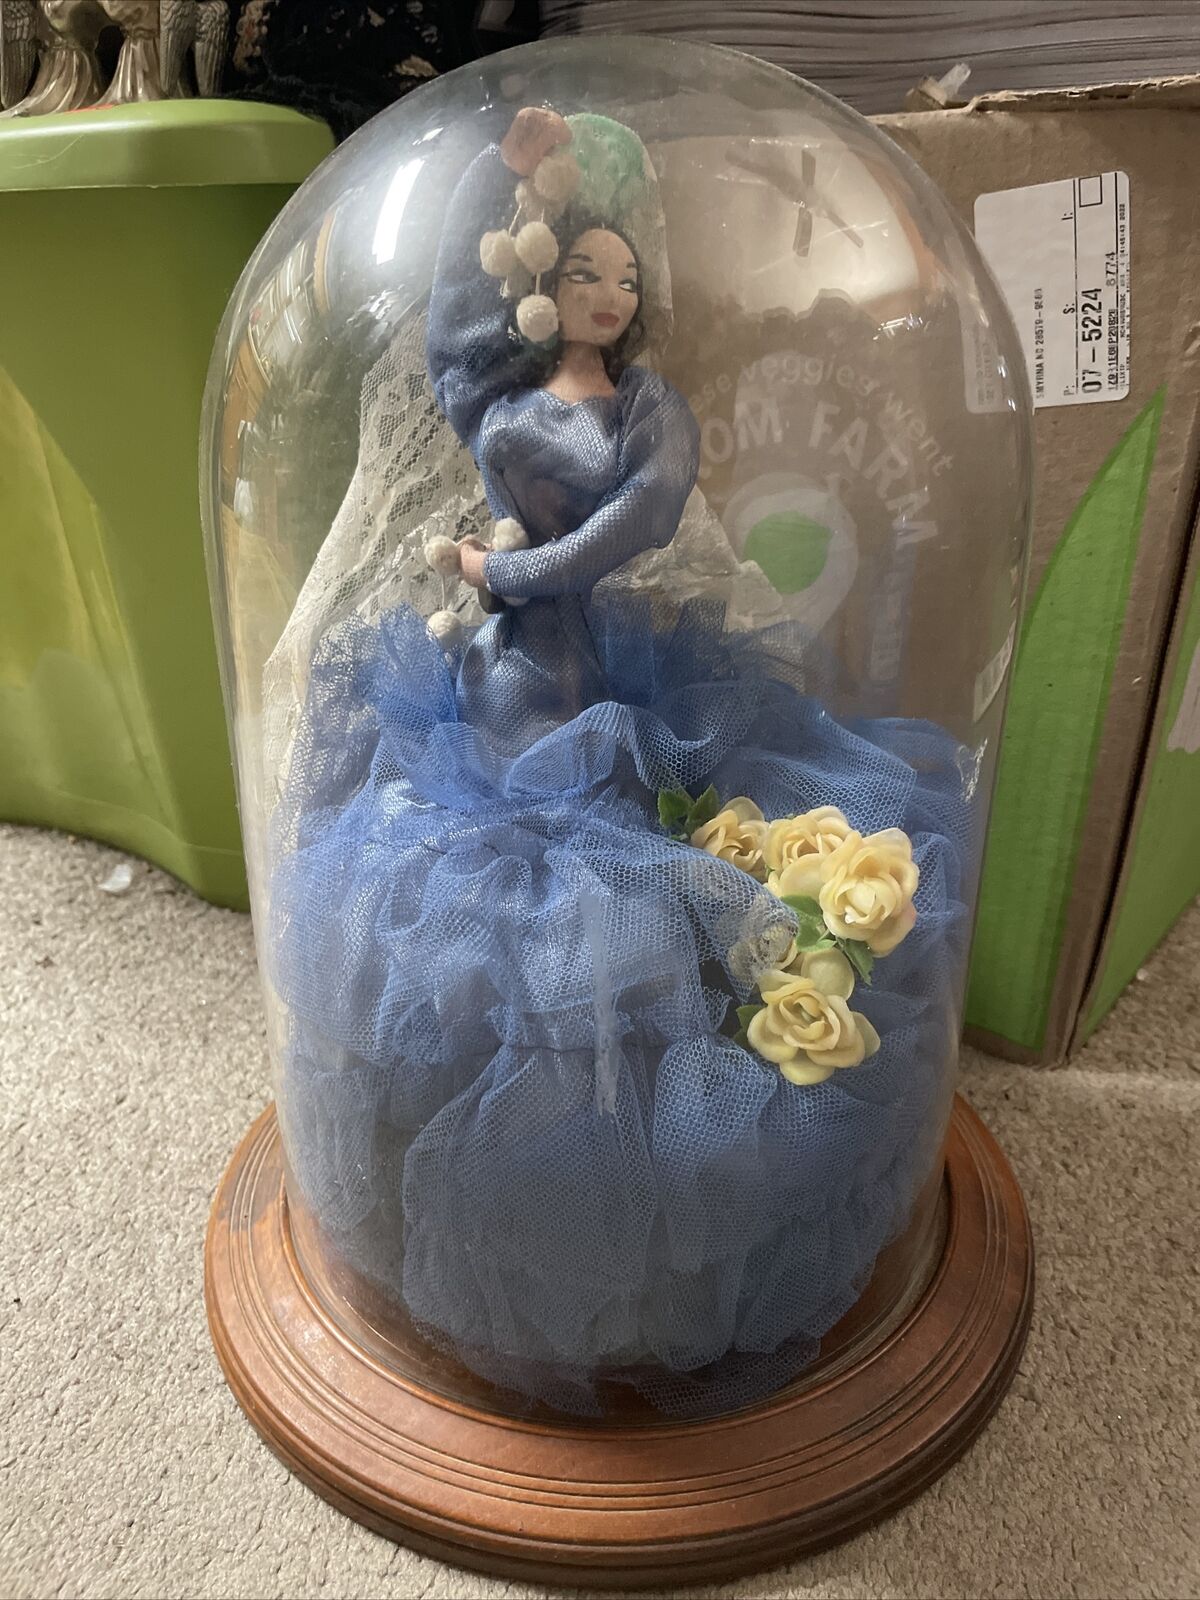 Vintage glorious glass dome With A Vintage Doll Bride?inside